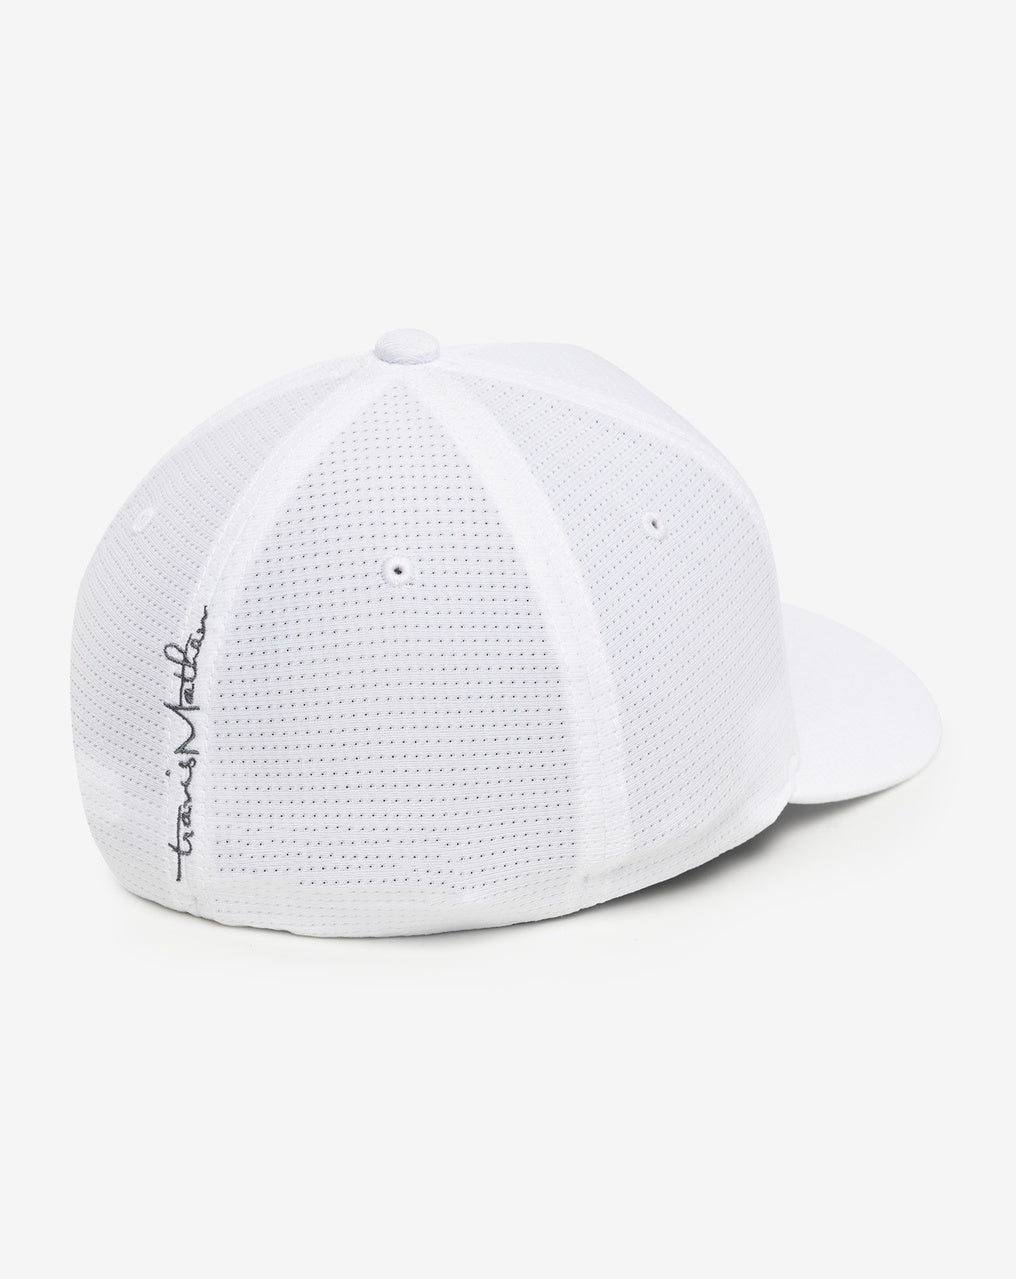 TravisMathew B-Bahamas Fitted Hat (Non-Current)